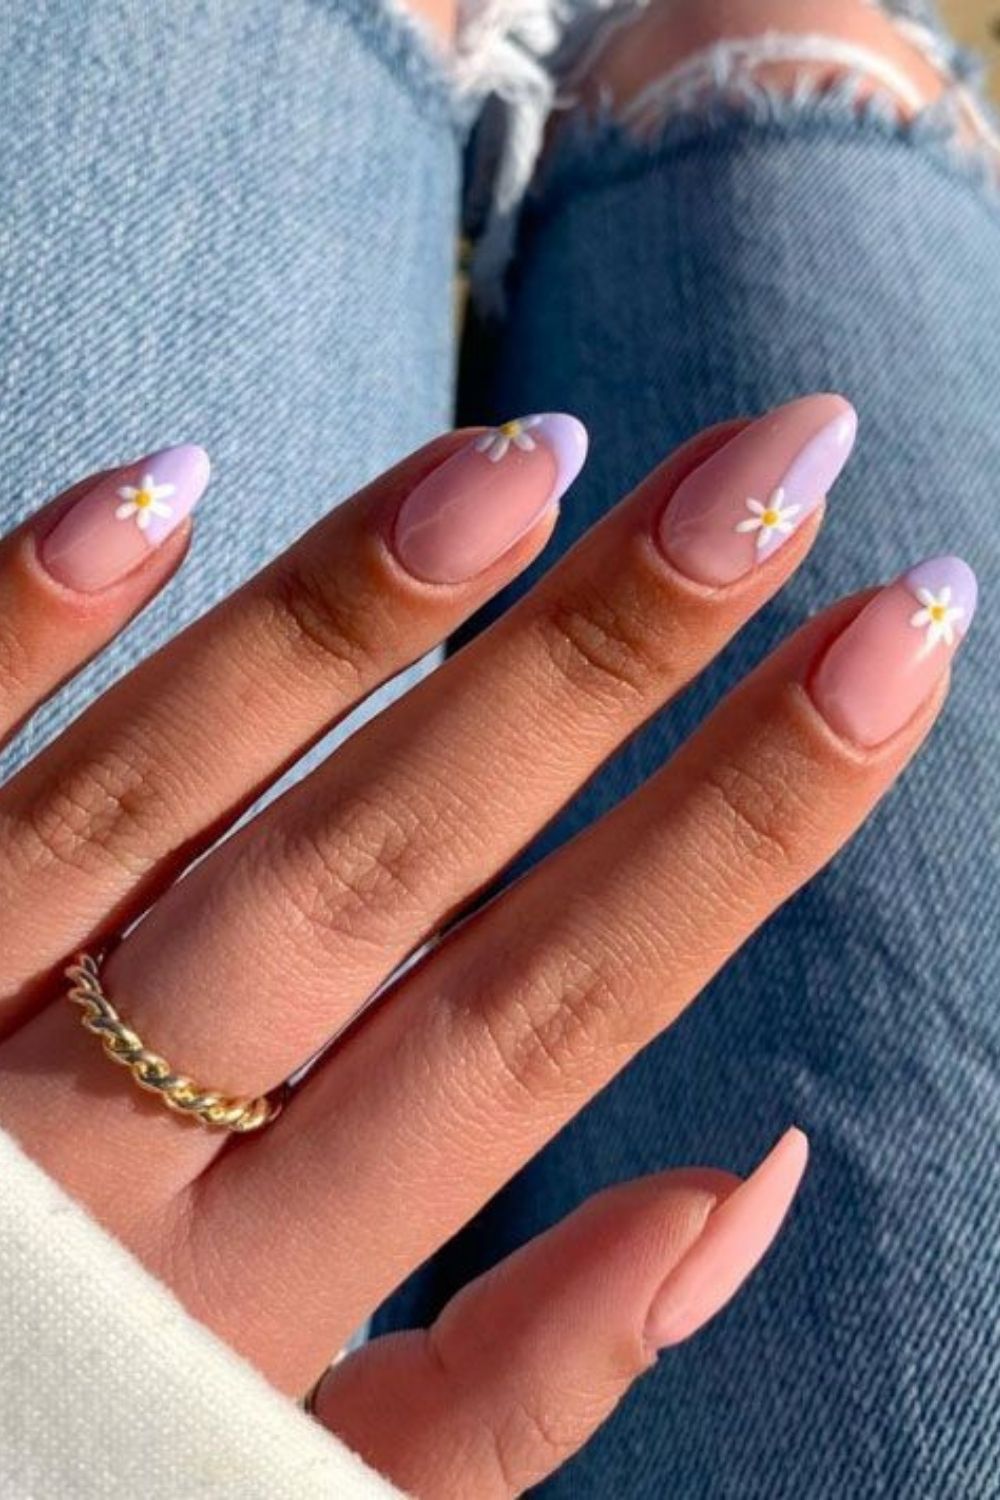 The Most Unique Nail Designs For Summer | Fashionisers©